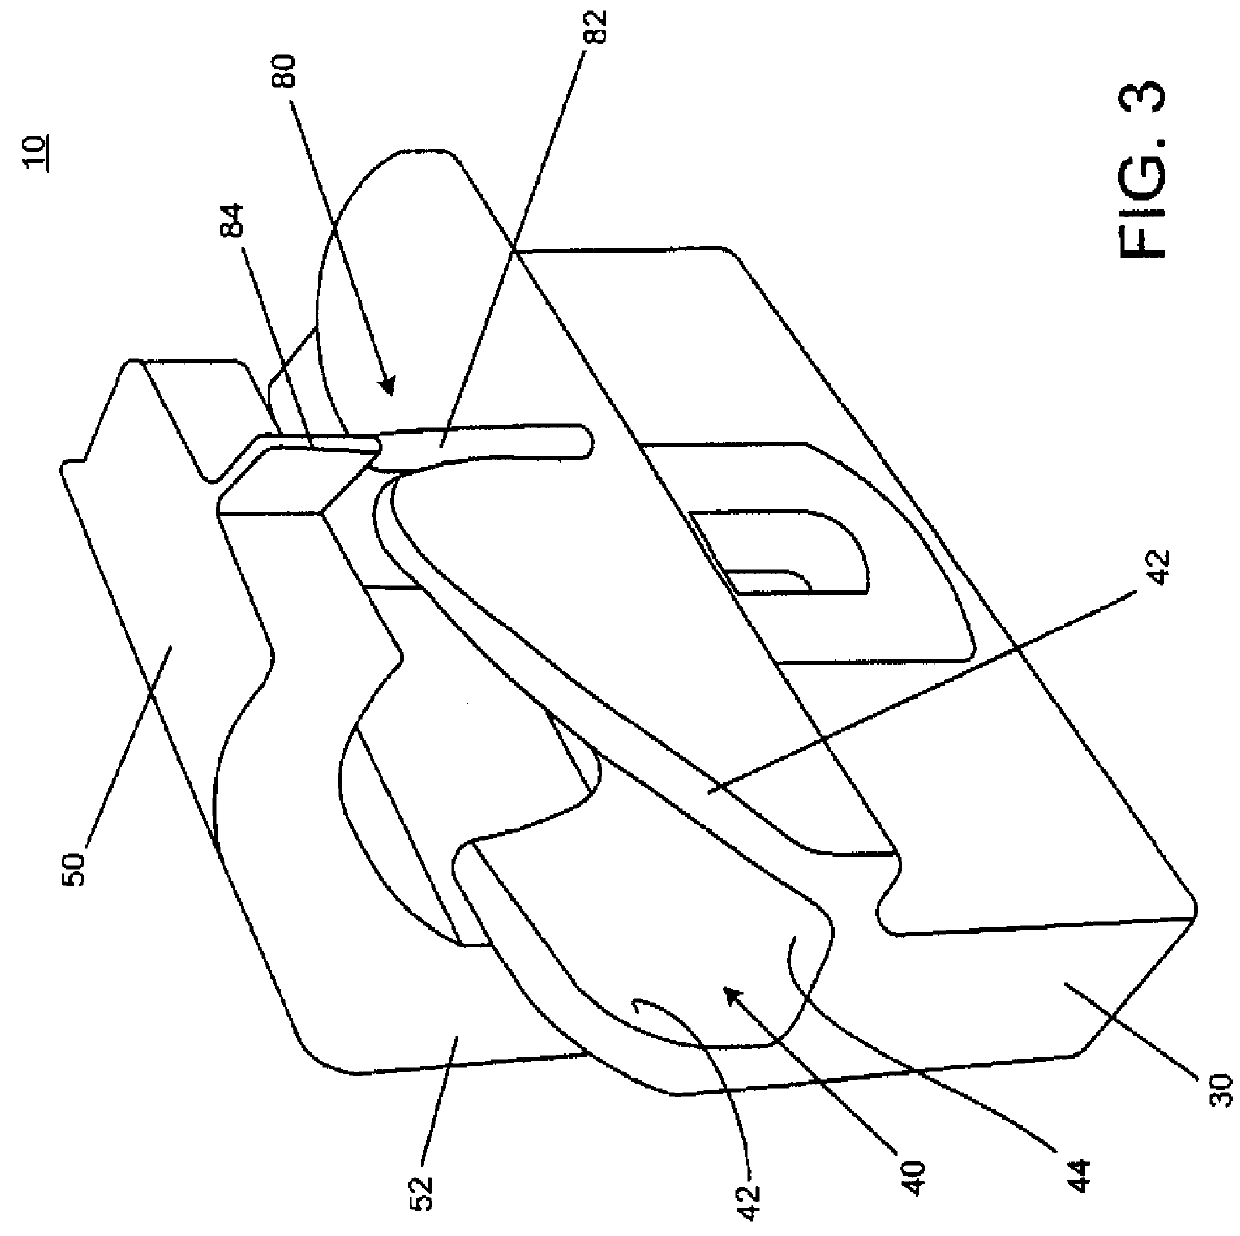 Stringing messenger clamp and methods of using the same